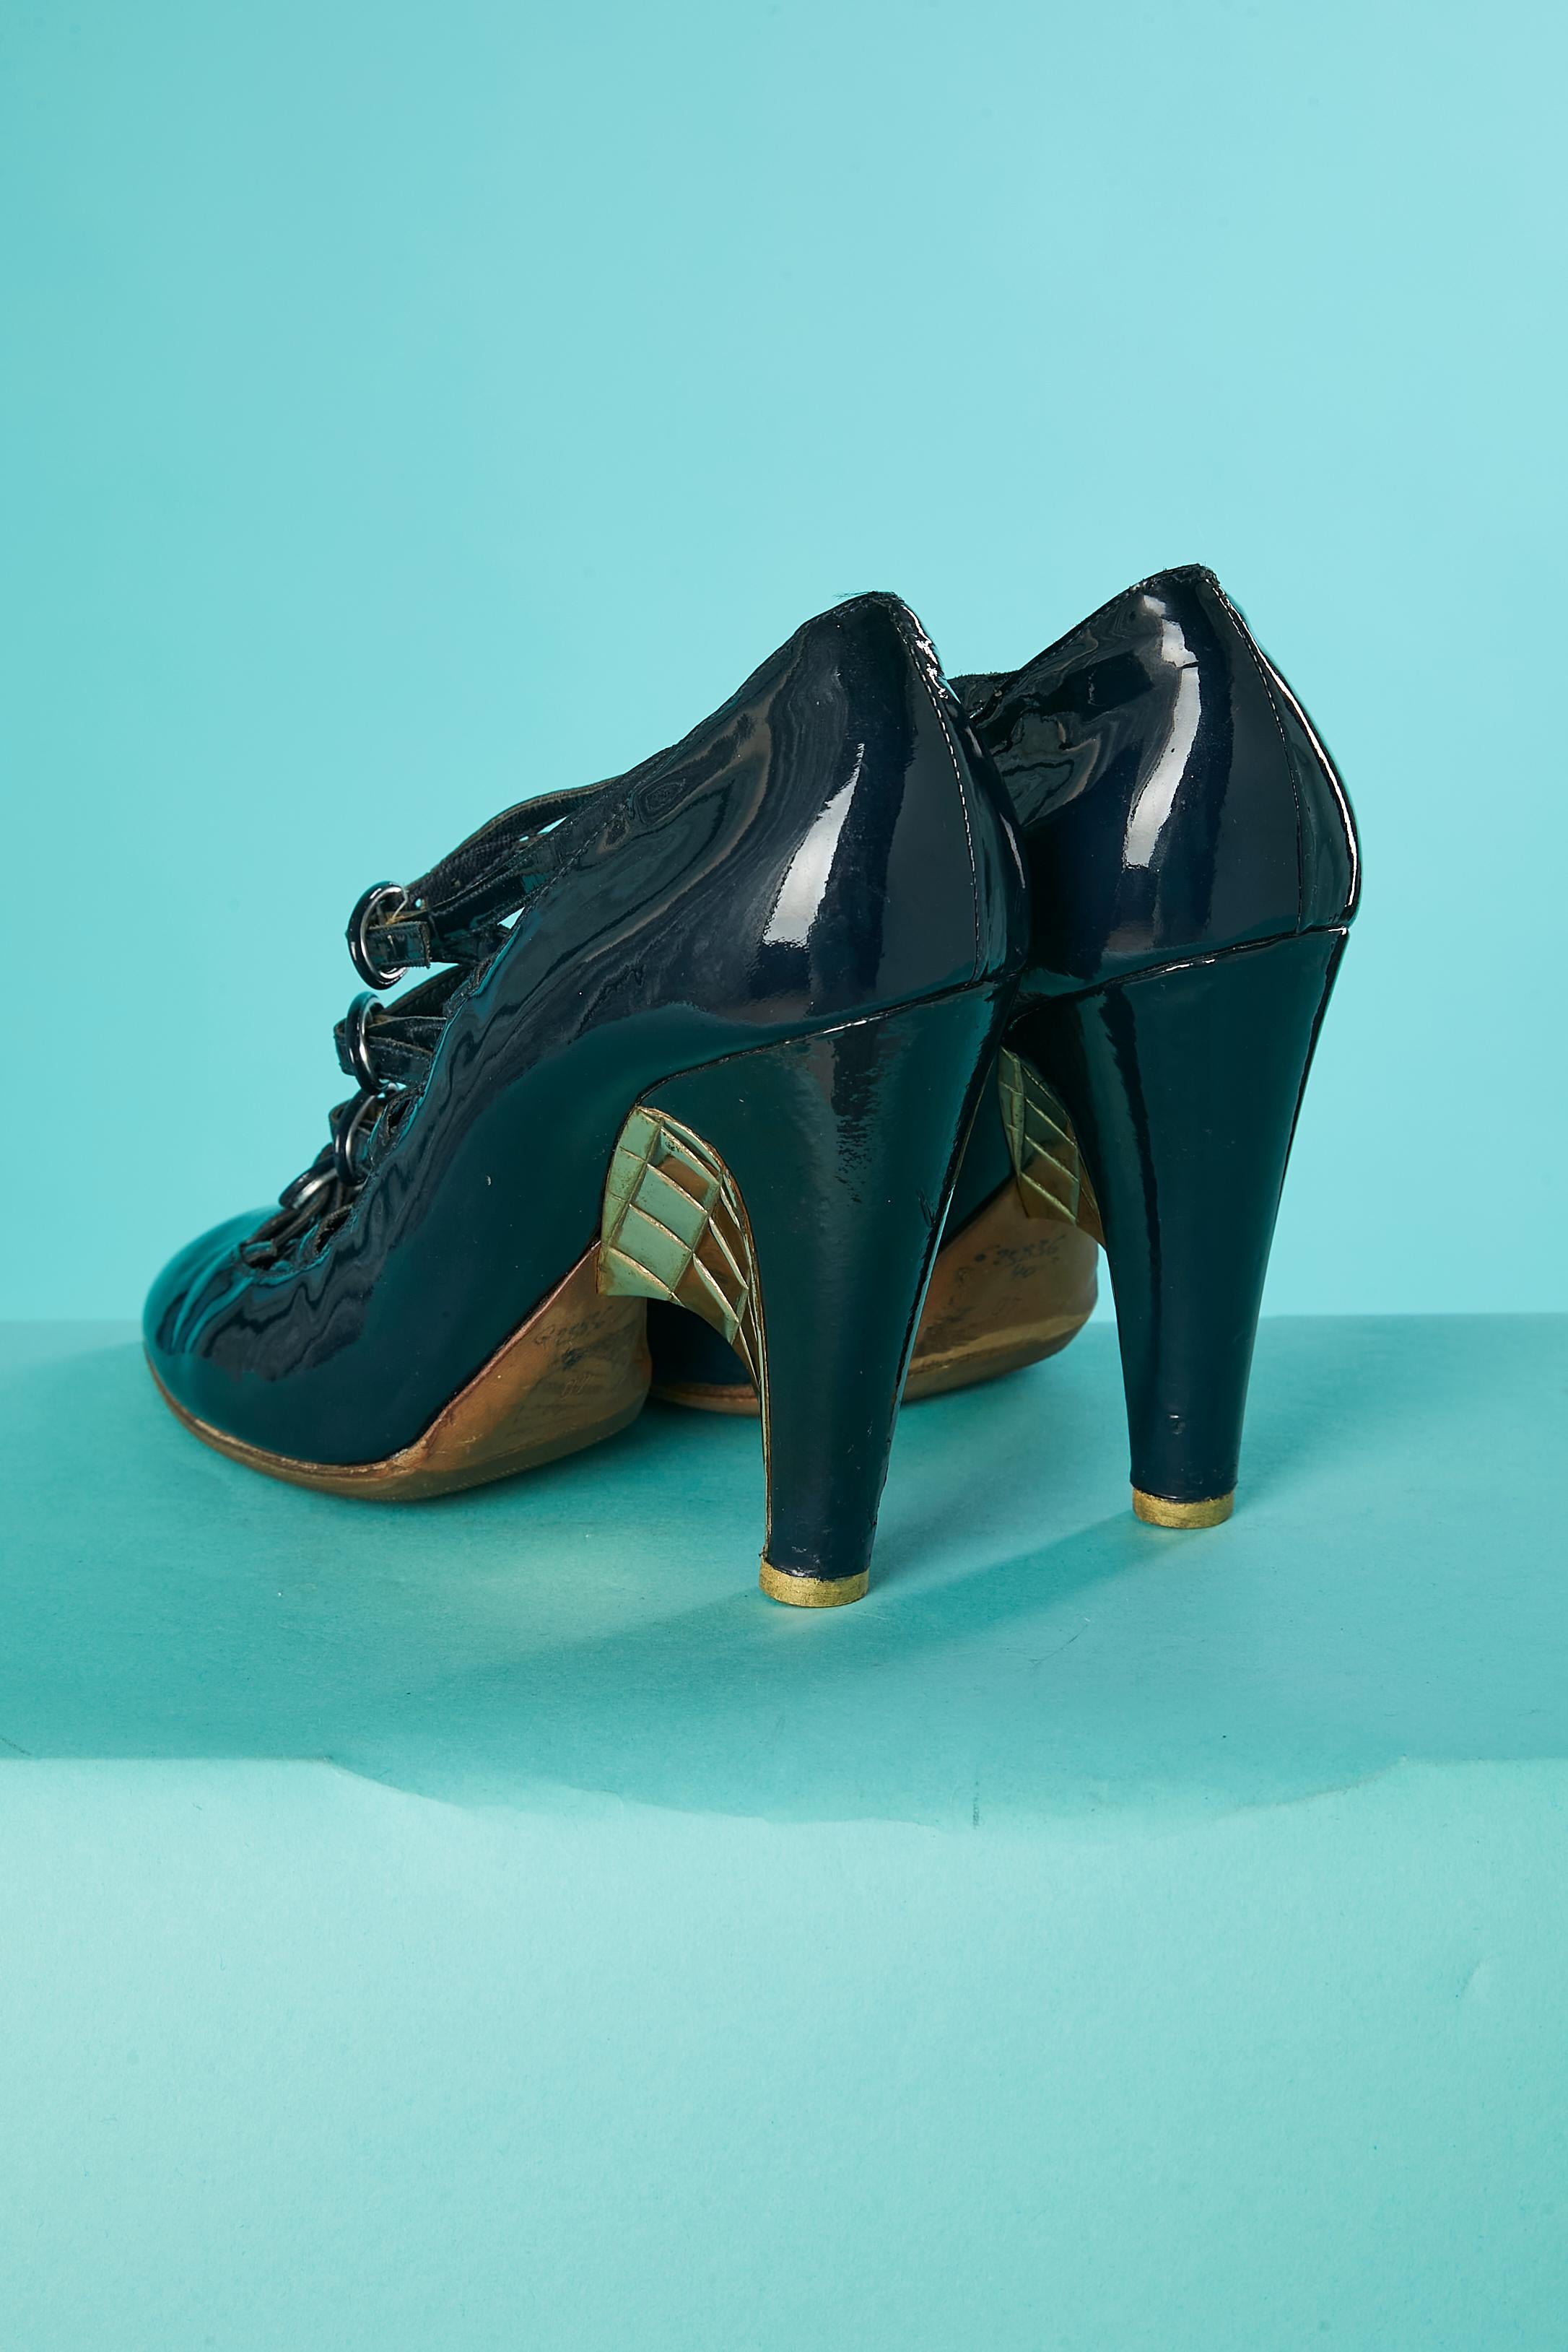 Black Navy patent leather pump with multi-buckles and gold metal heels Chanel  For Sale